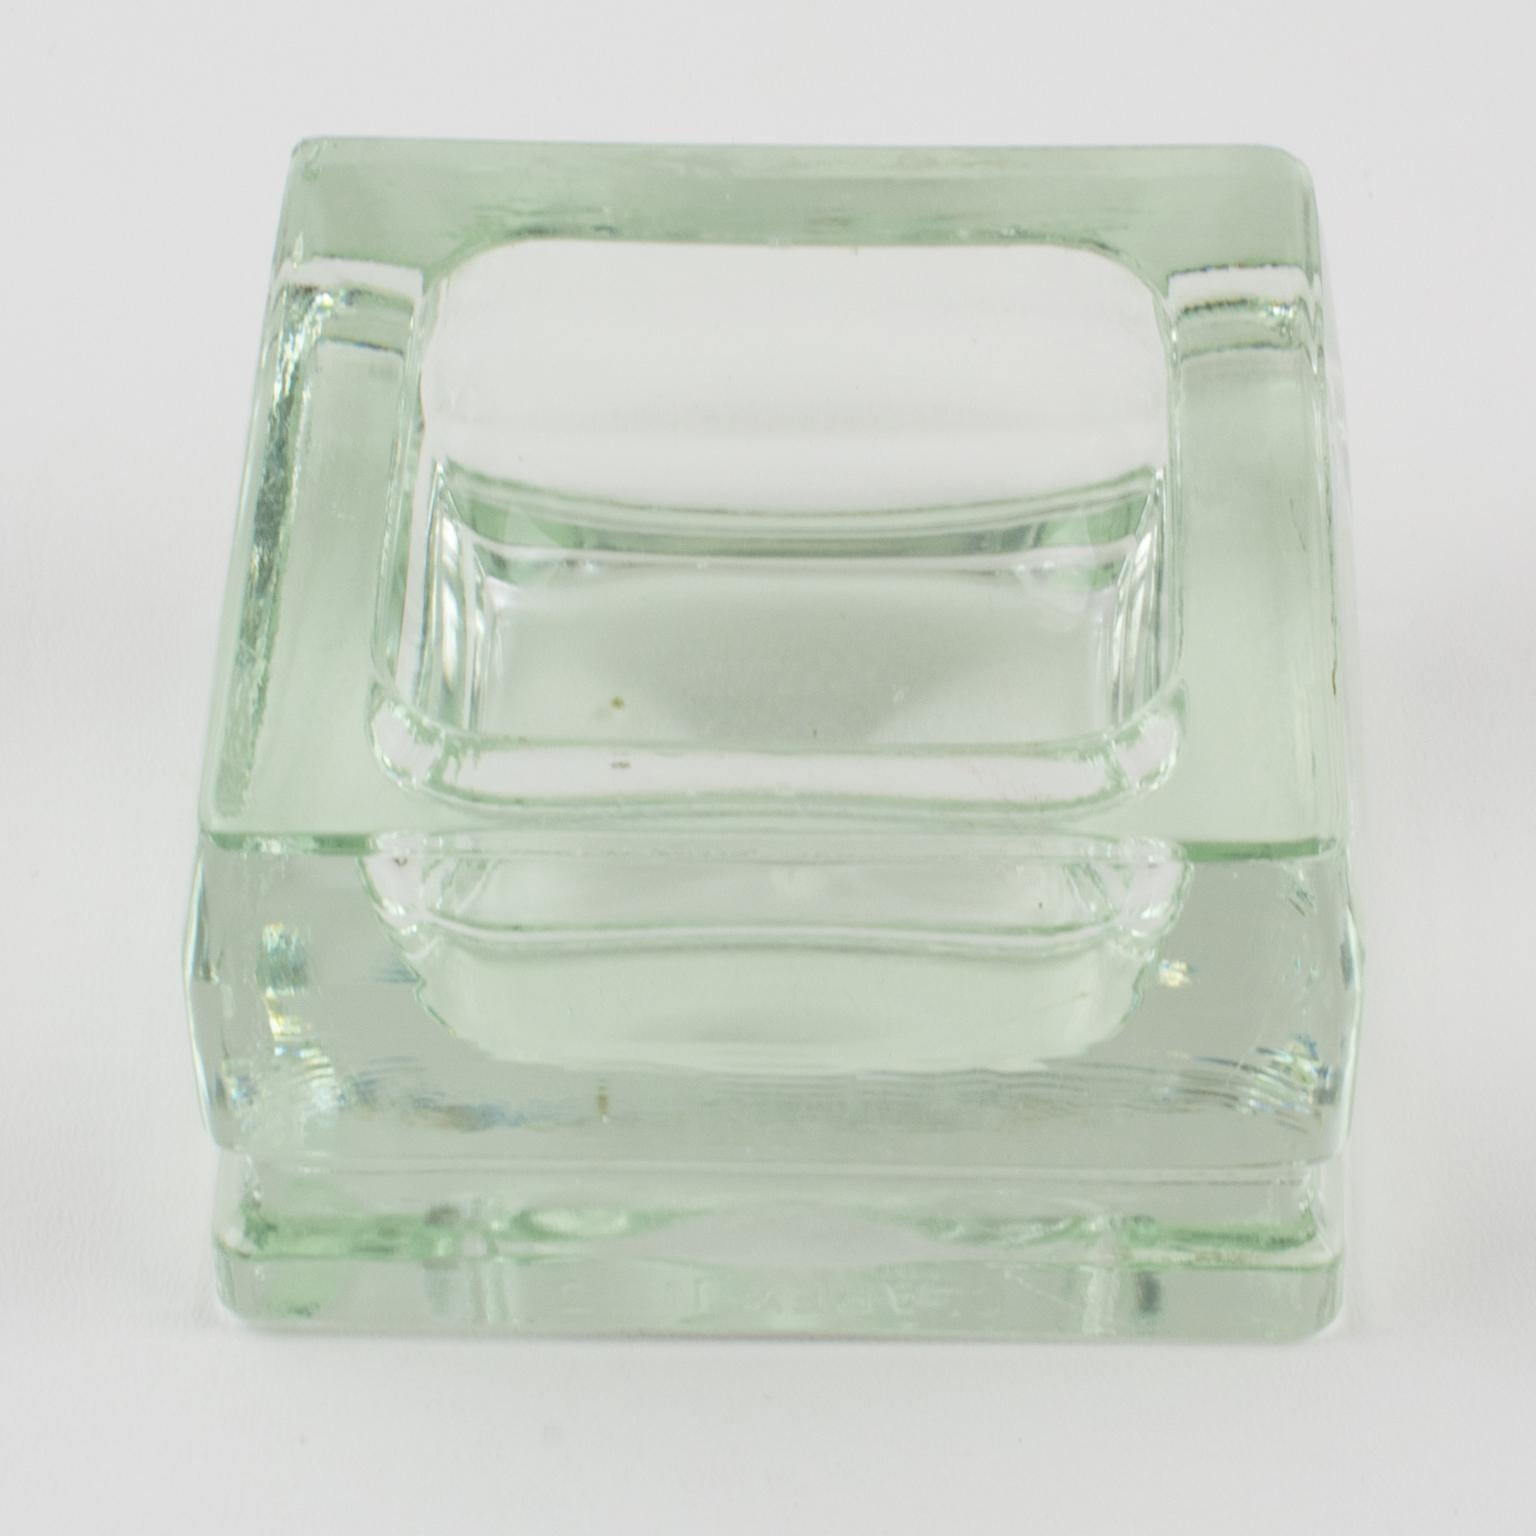 Designed by Le Corbusier for Lumax Glass Desk Tidy Ashtray Catchall 1